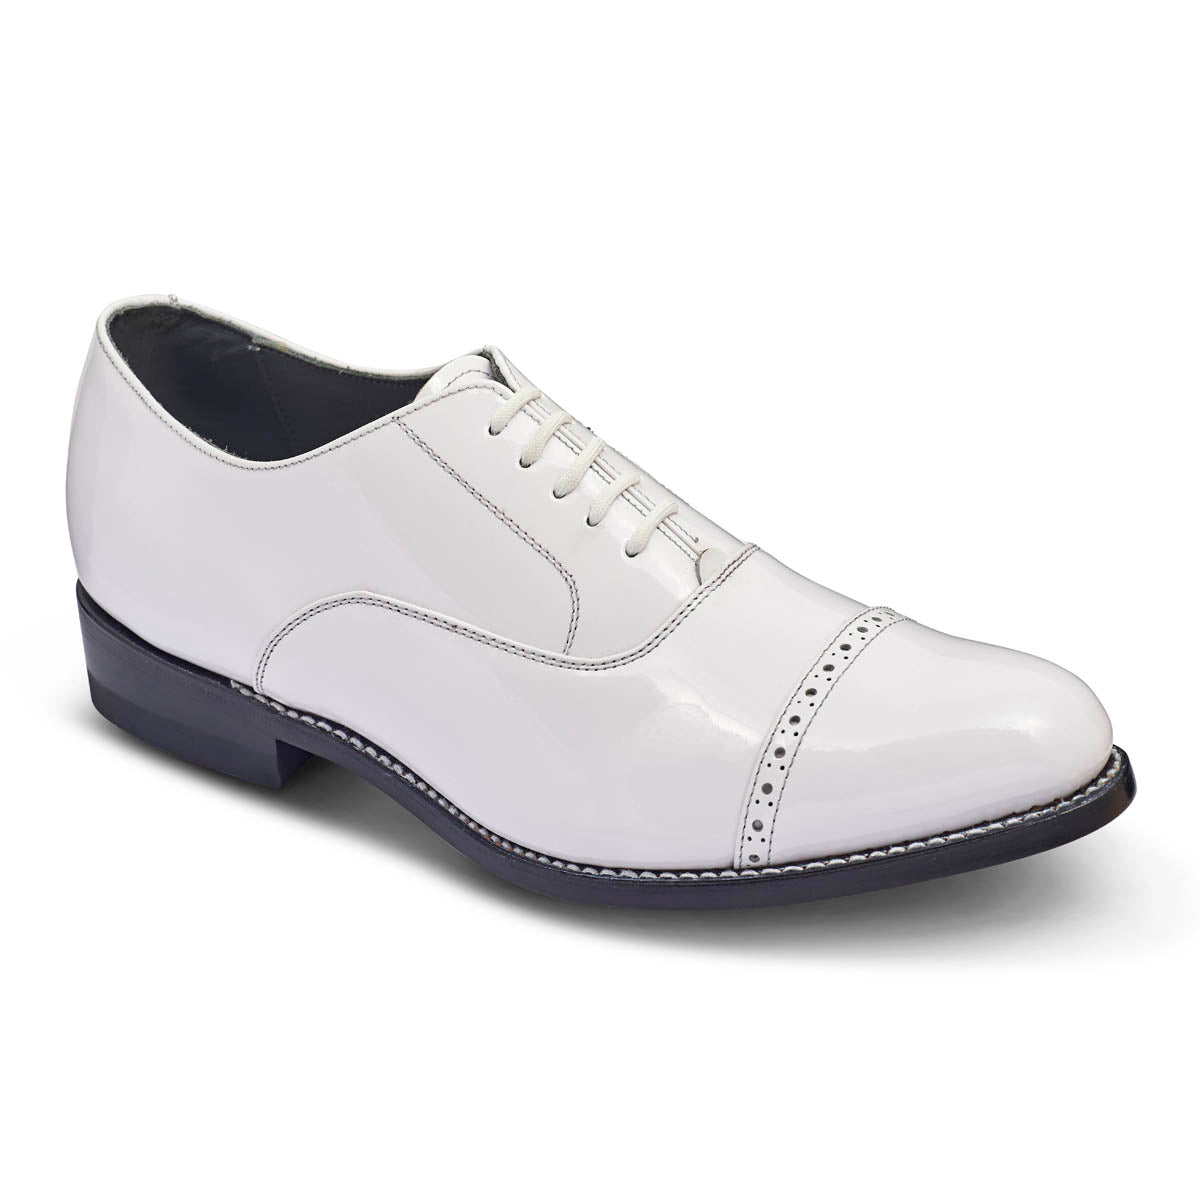 STACY PENNER - White Cap Toe (A1235)